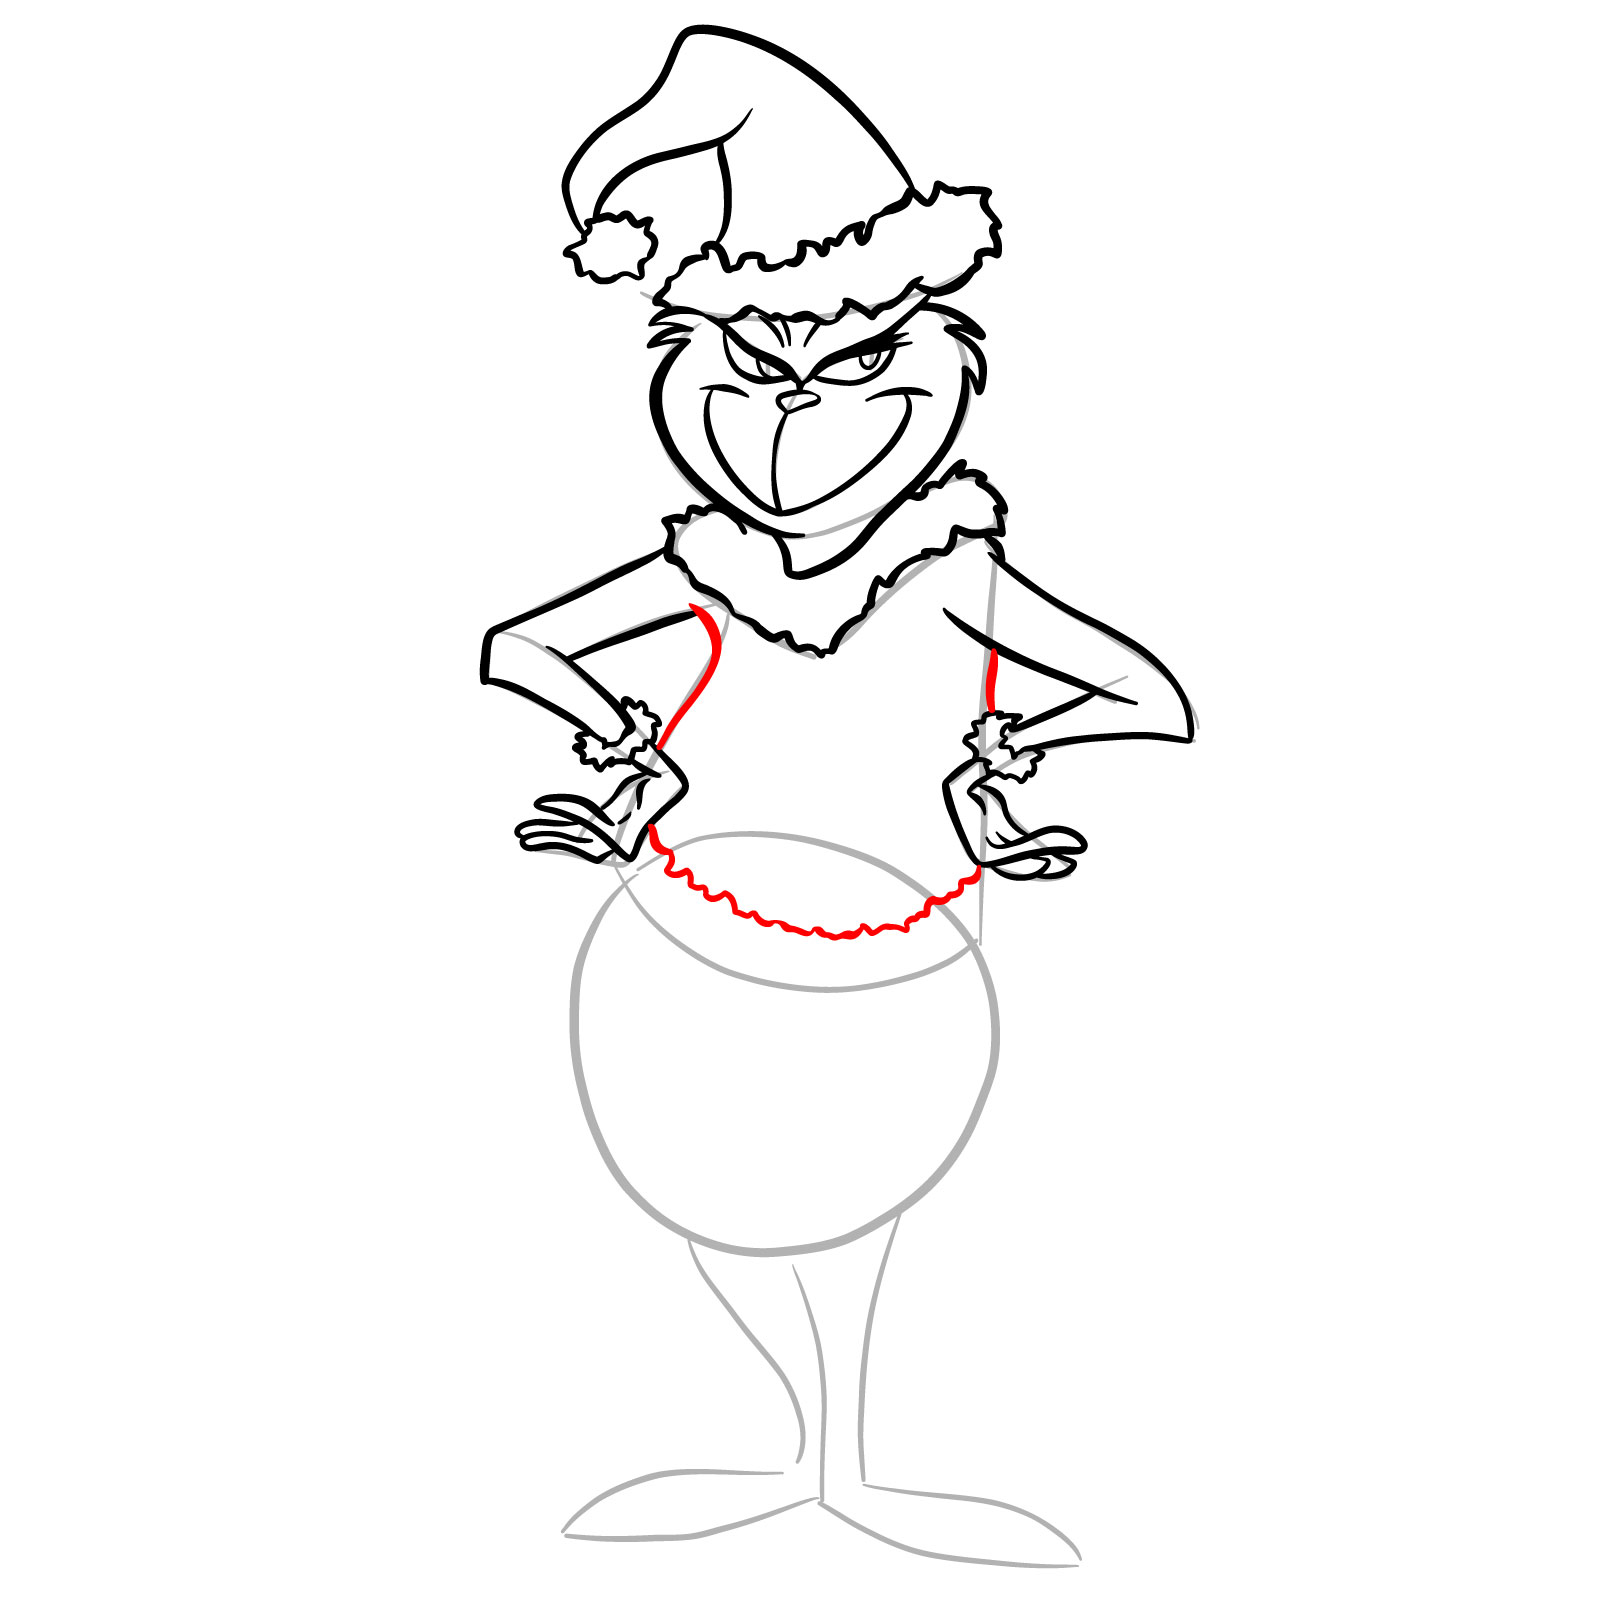 How to draw The Grinch in a Christmas costume - step 21